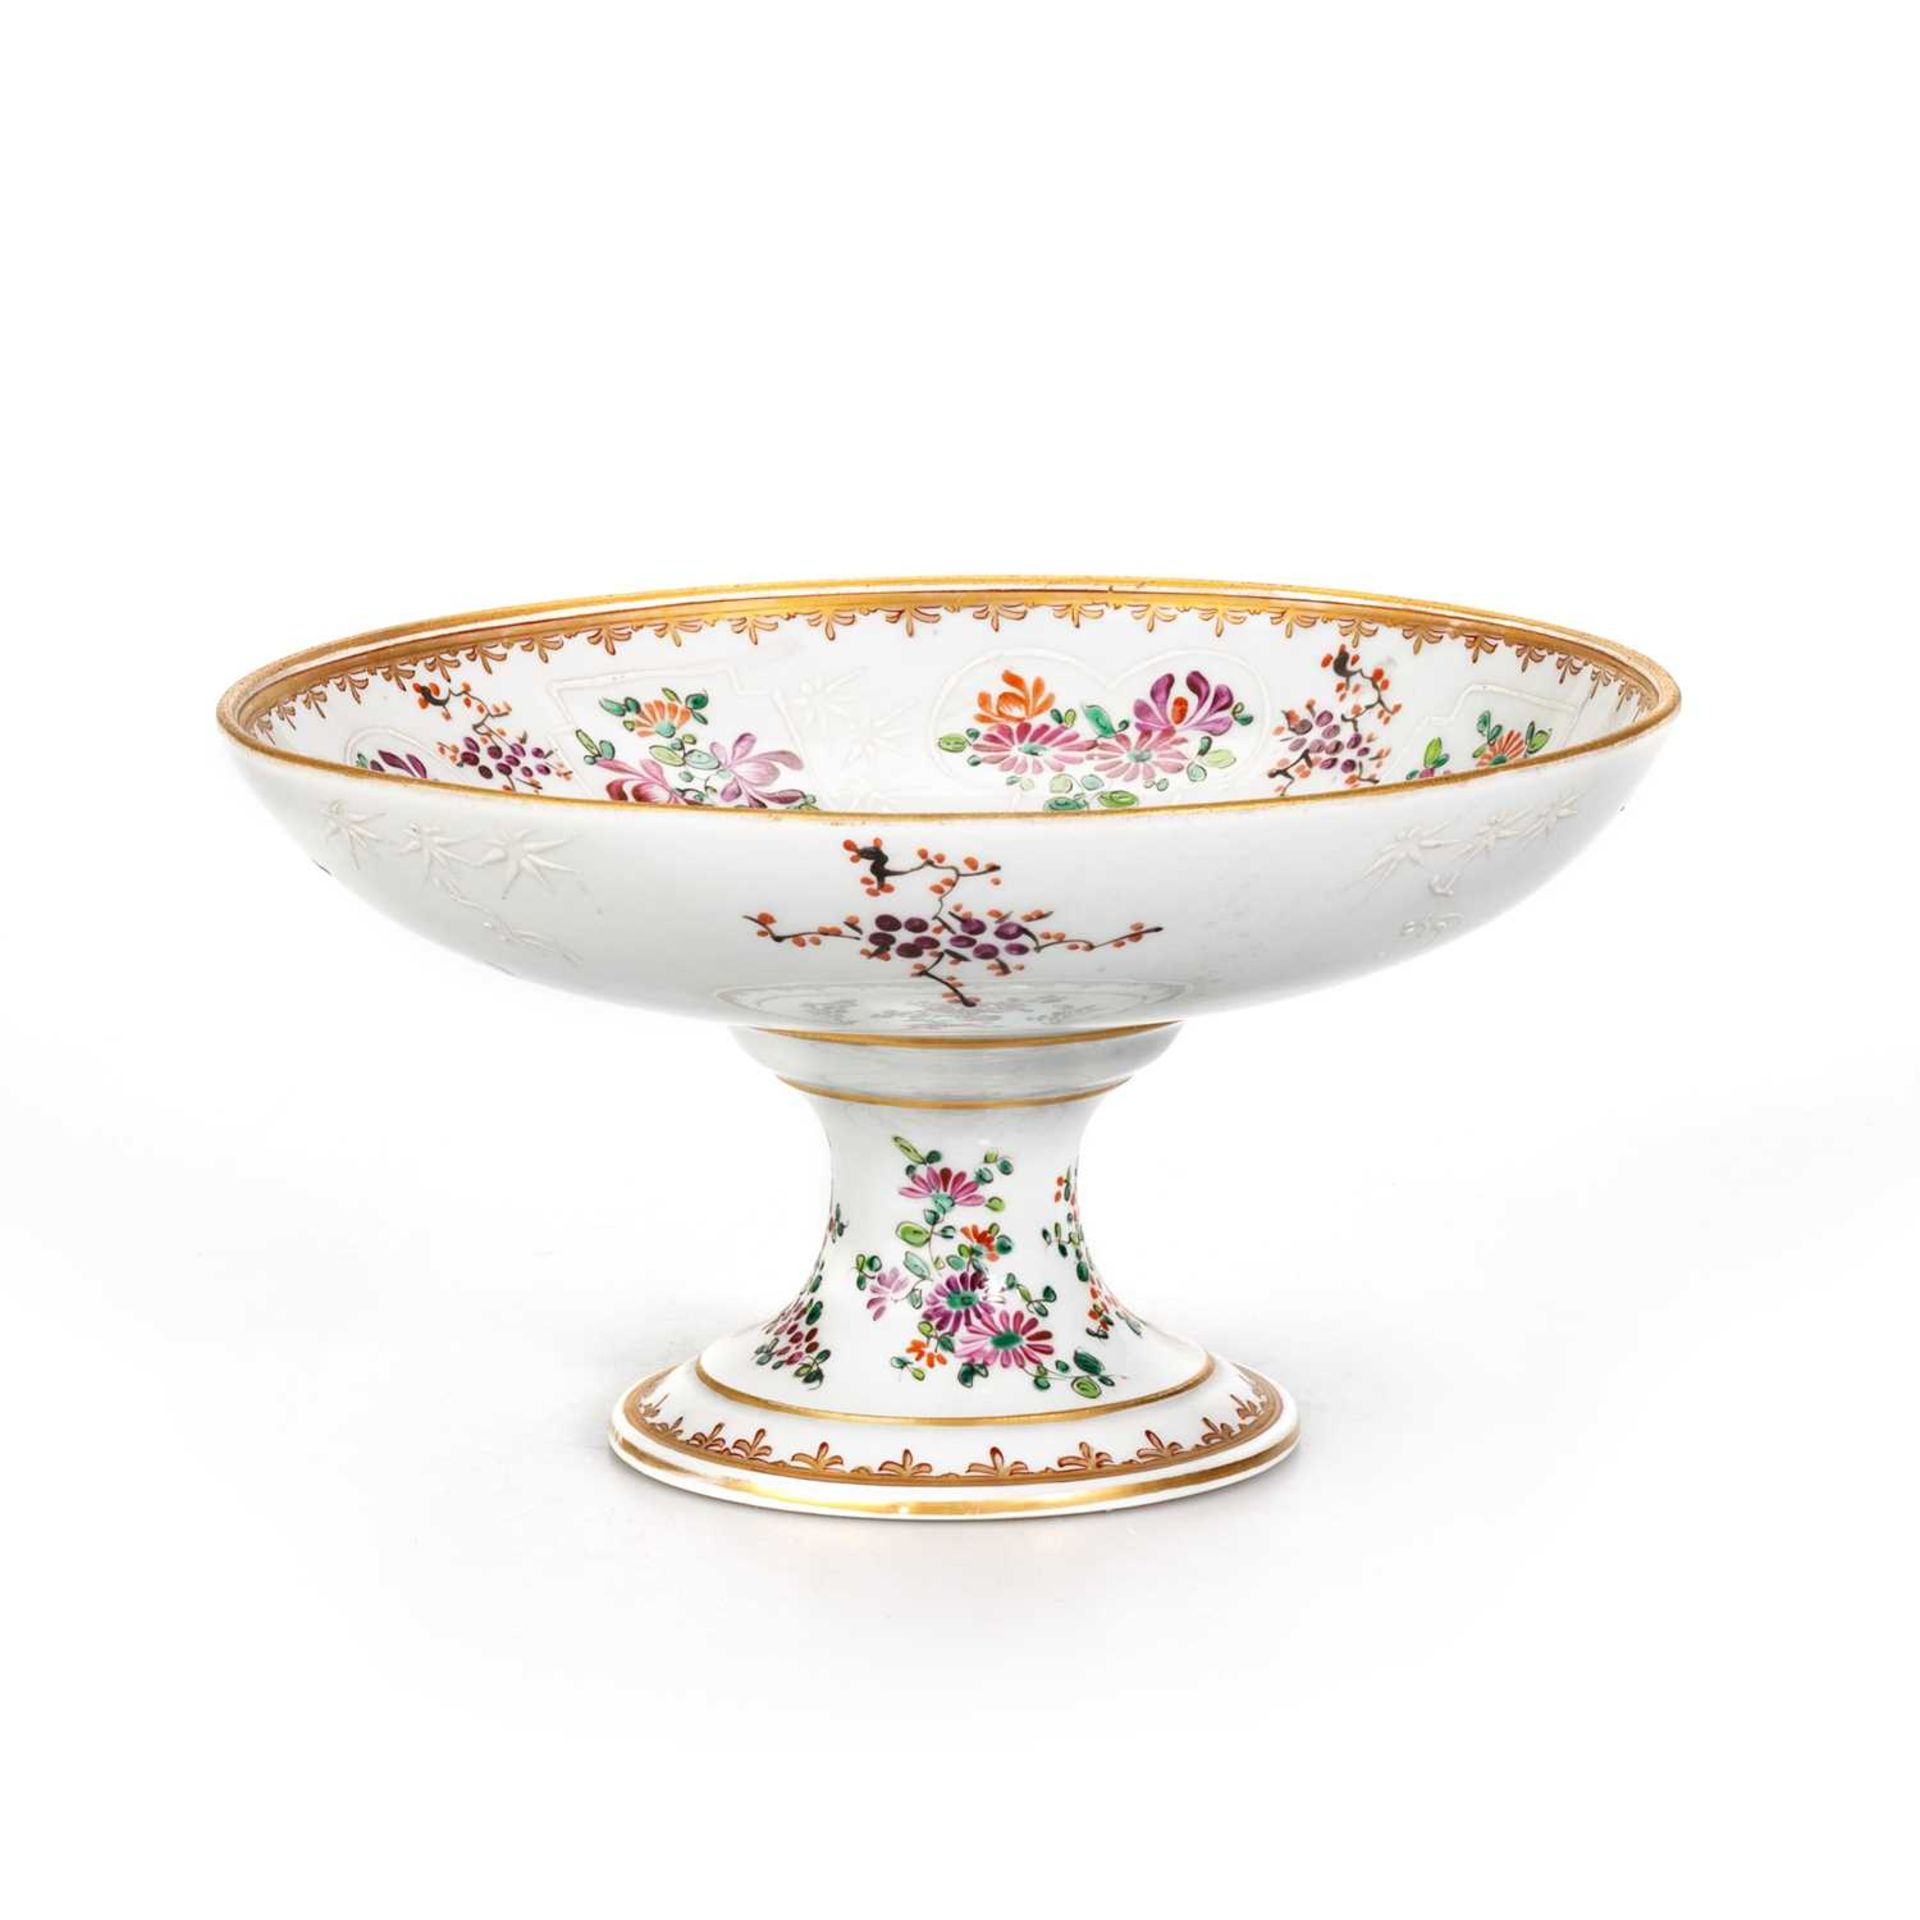 A SAMSON PORCELAIN DESSERT SERVICE IN CHINESE EXPORT ARMORIAL STYLE - Image 3 of 6